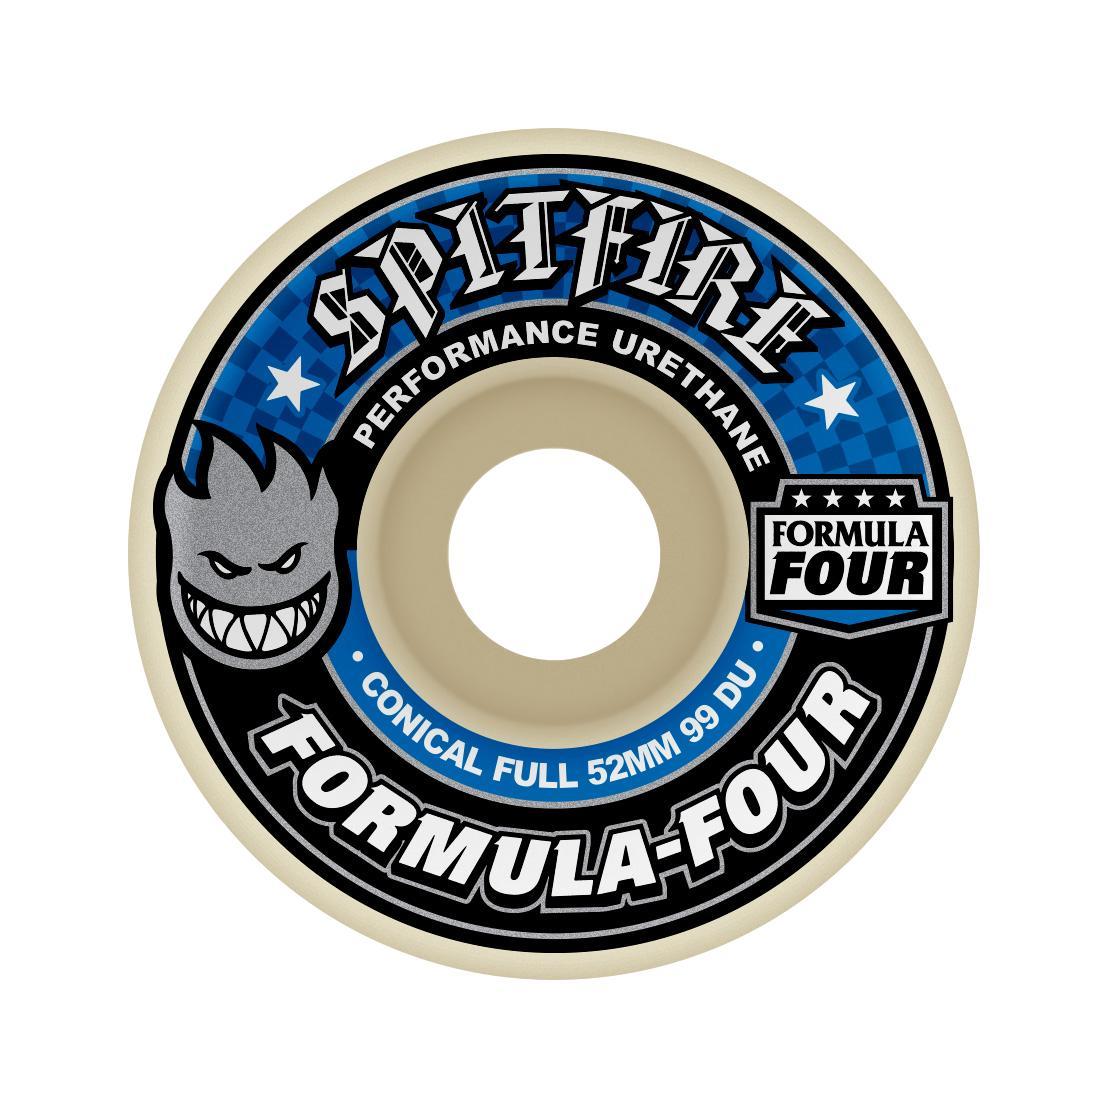 Spitfire F4 99a Conical Full 54mm - Venue Skateboards